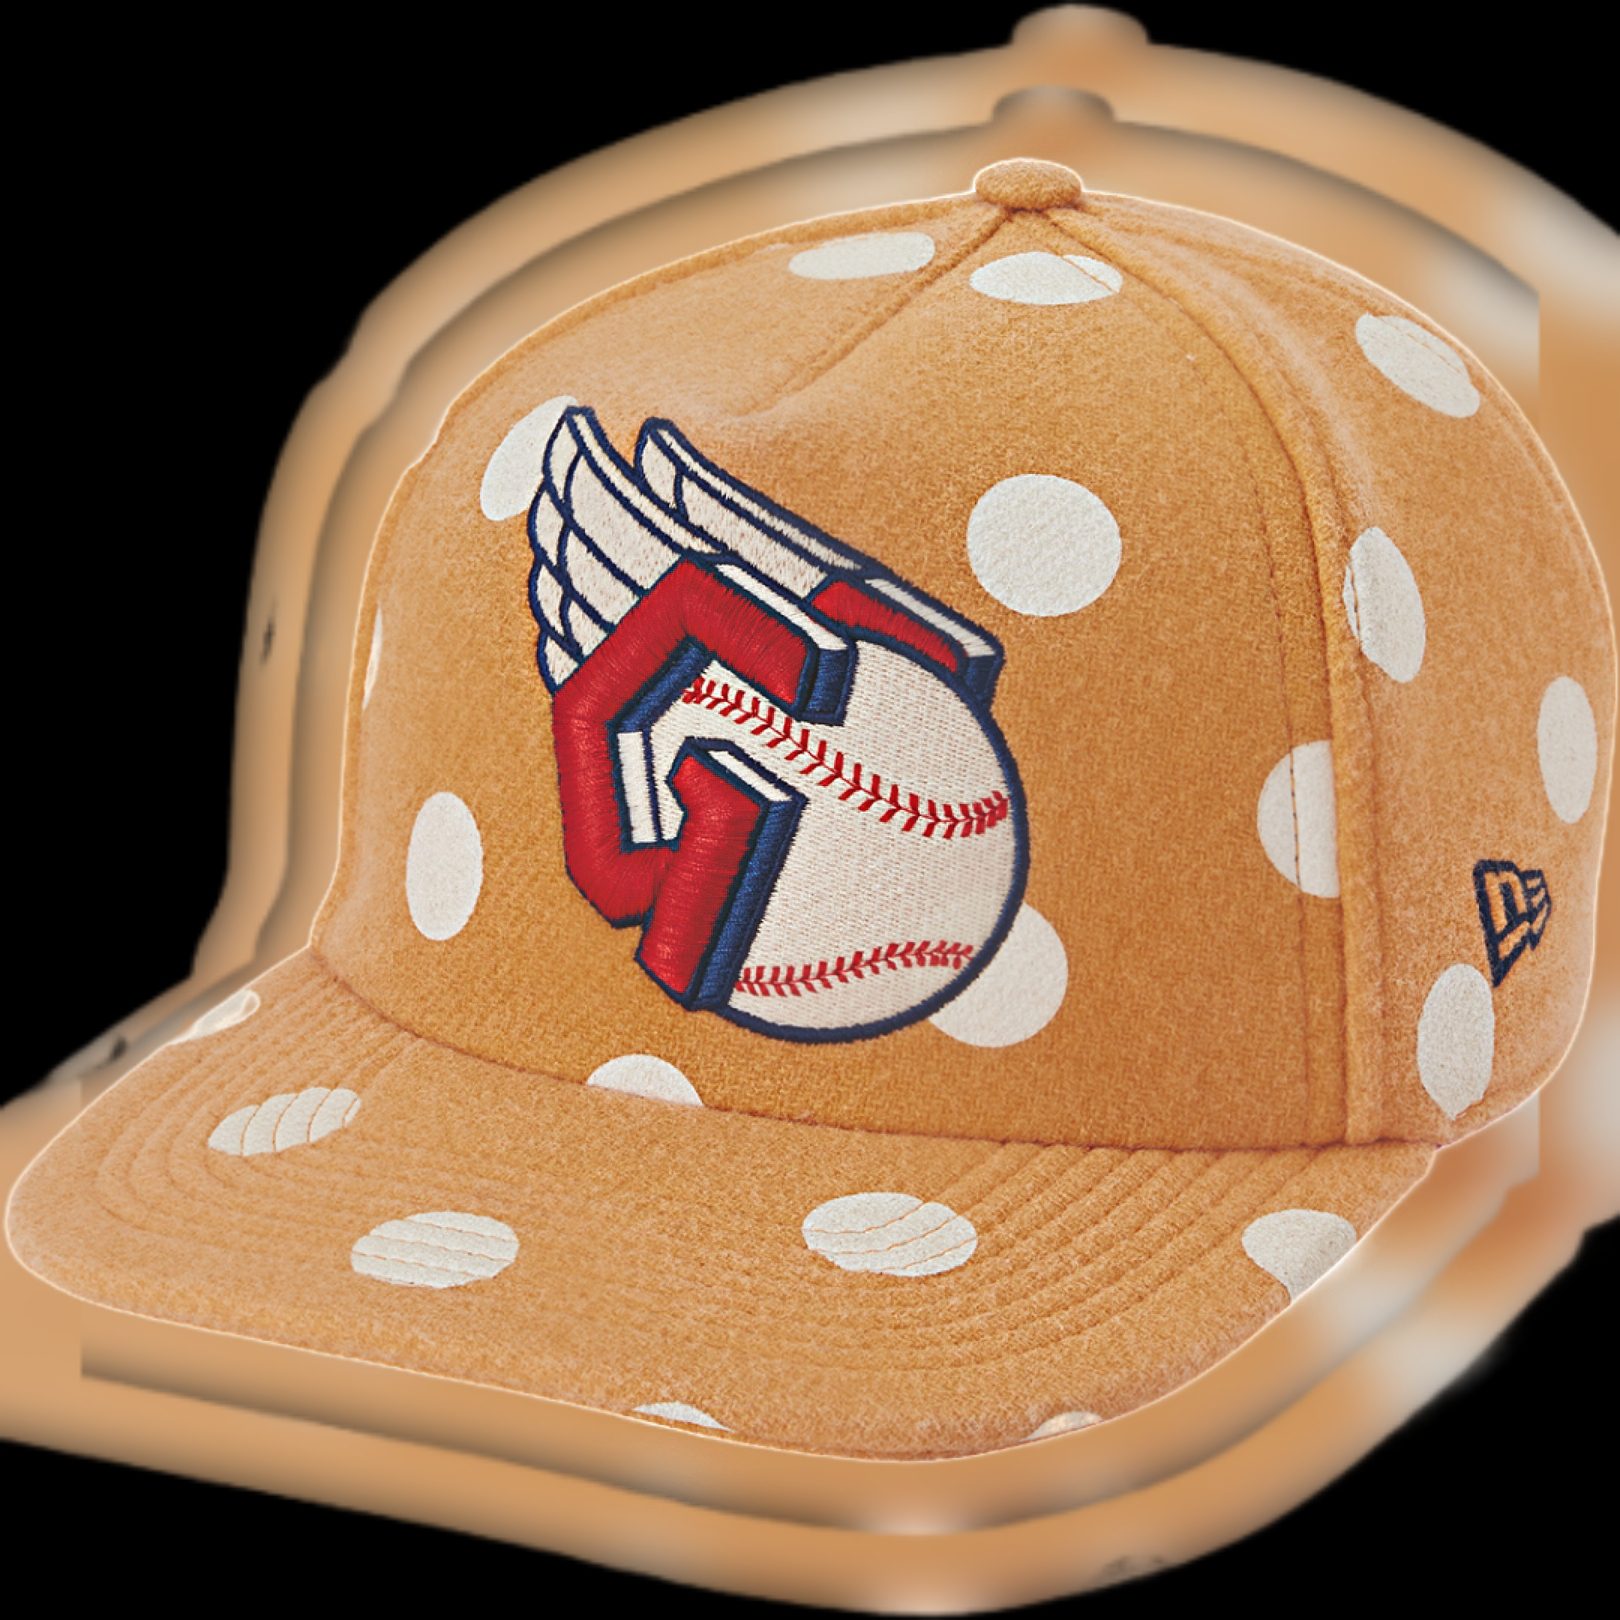 Gucci’s latest MLB Capsule Collection, in collaboration with Major League Baseball™ via 360 MAGAZINE.